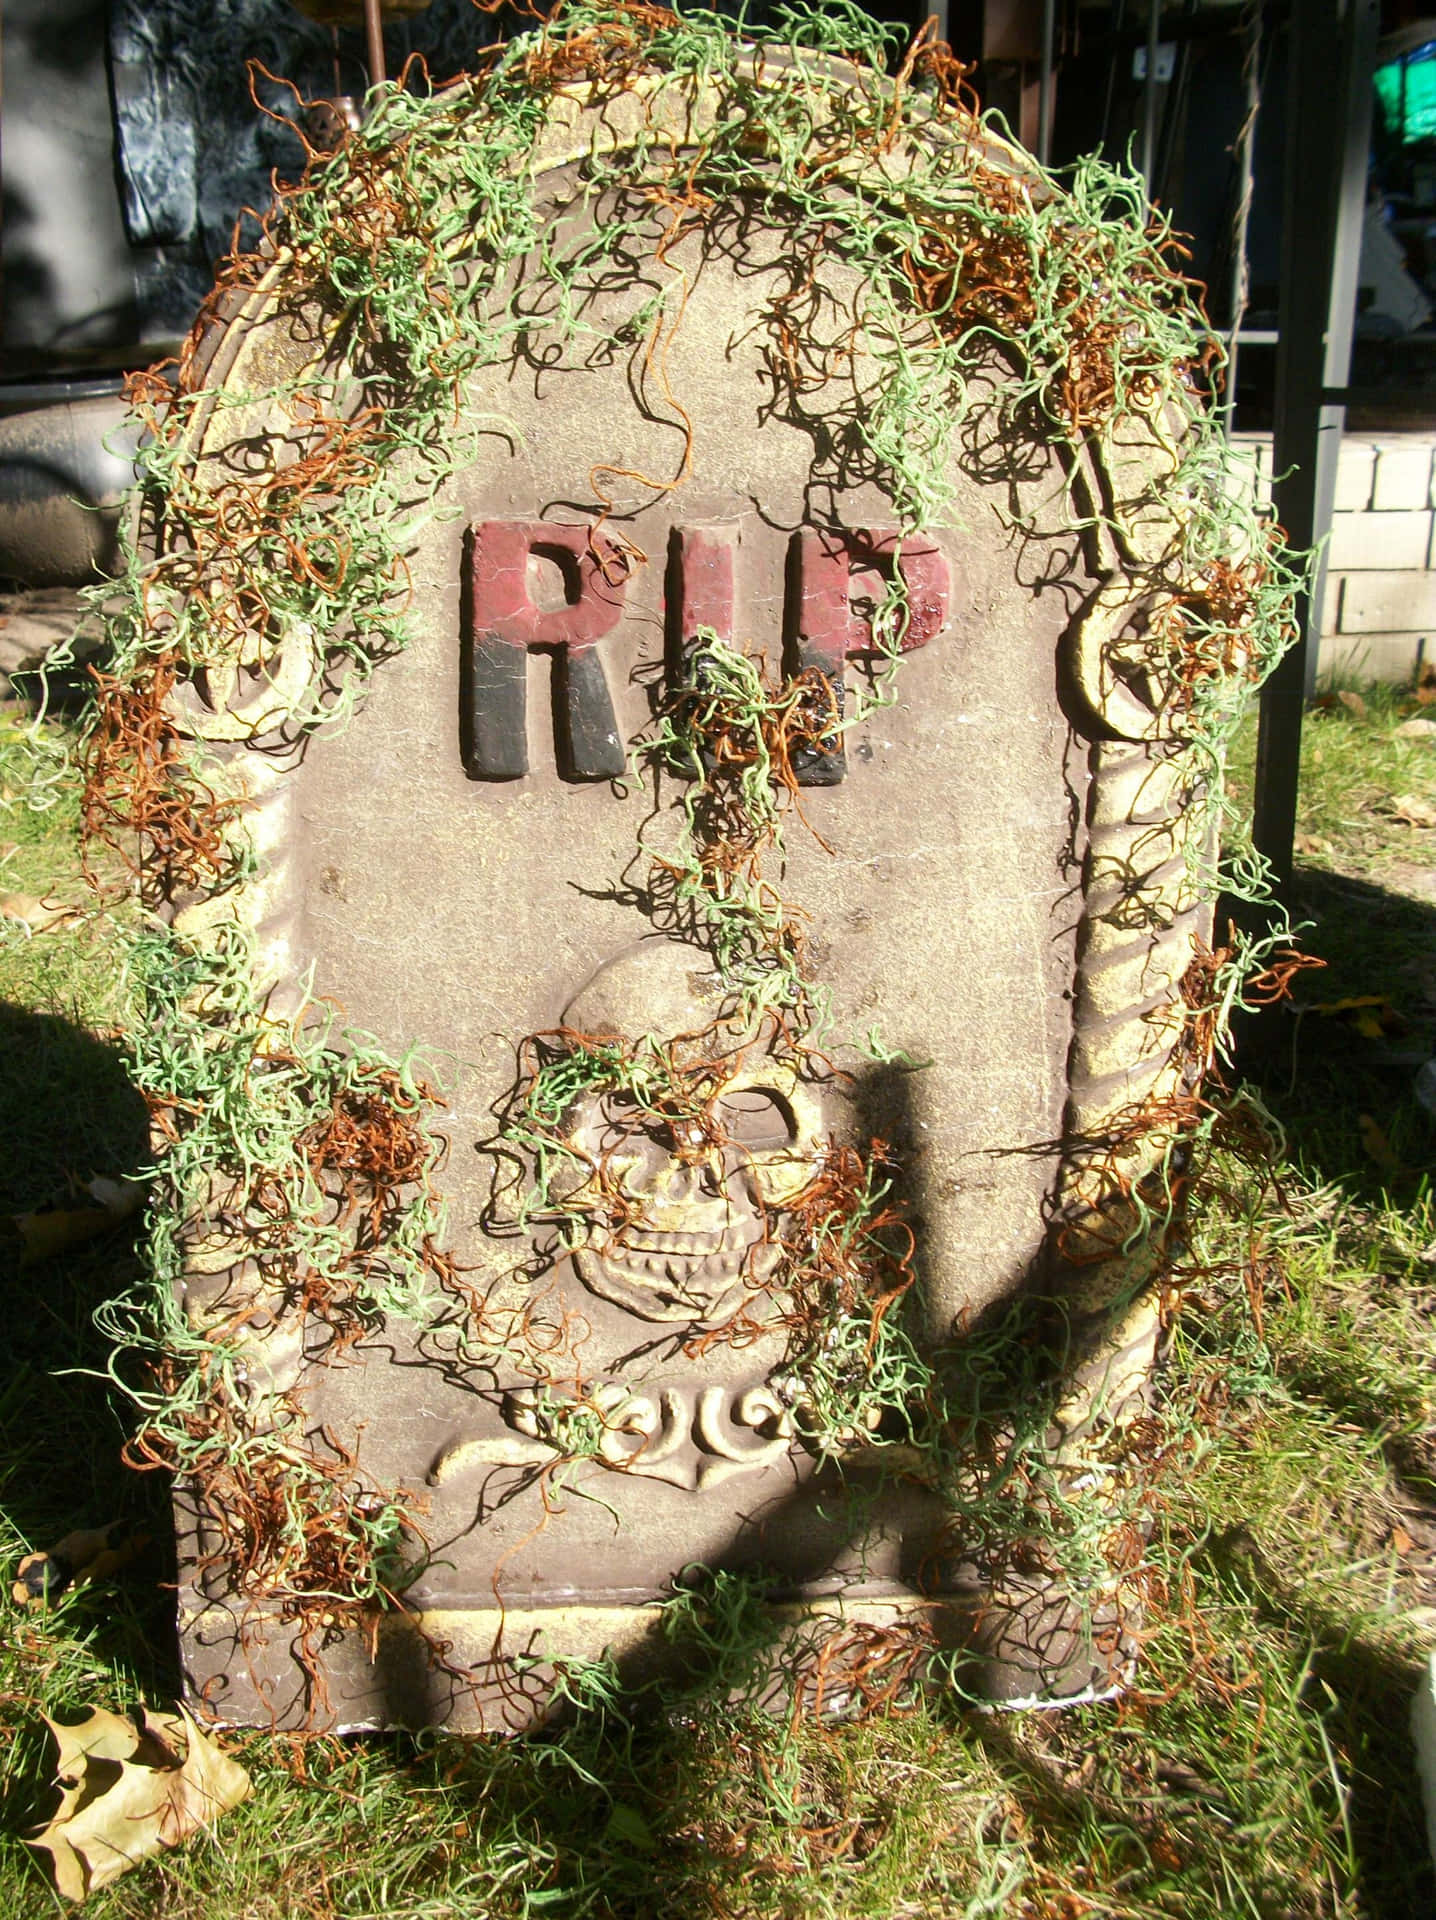 A Gravestone With A Skull On It